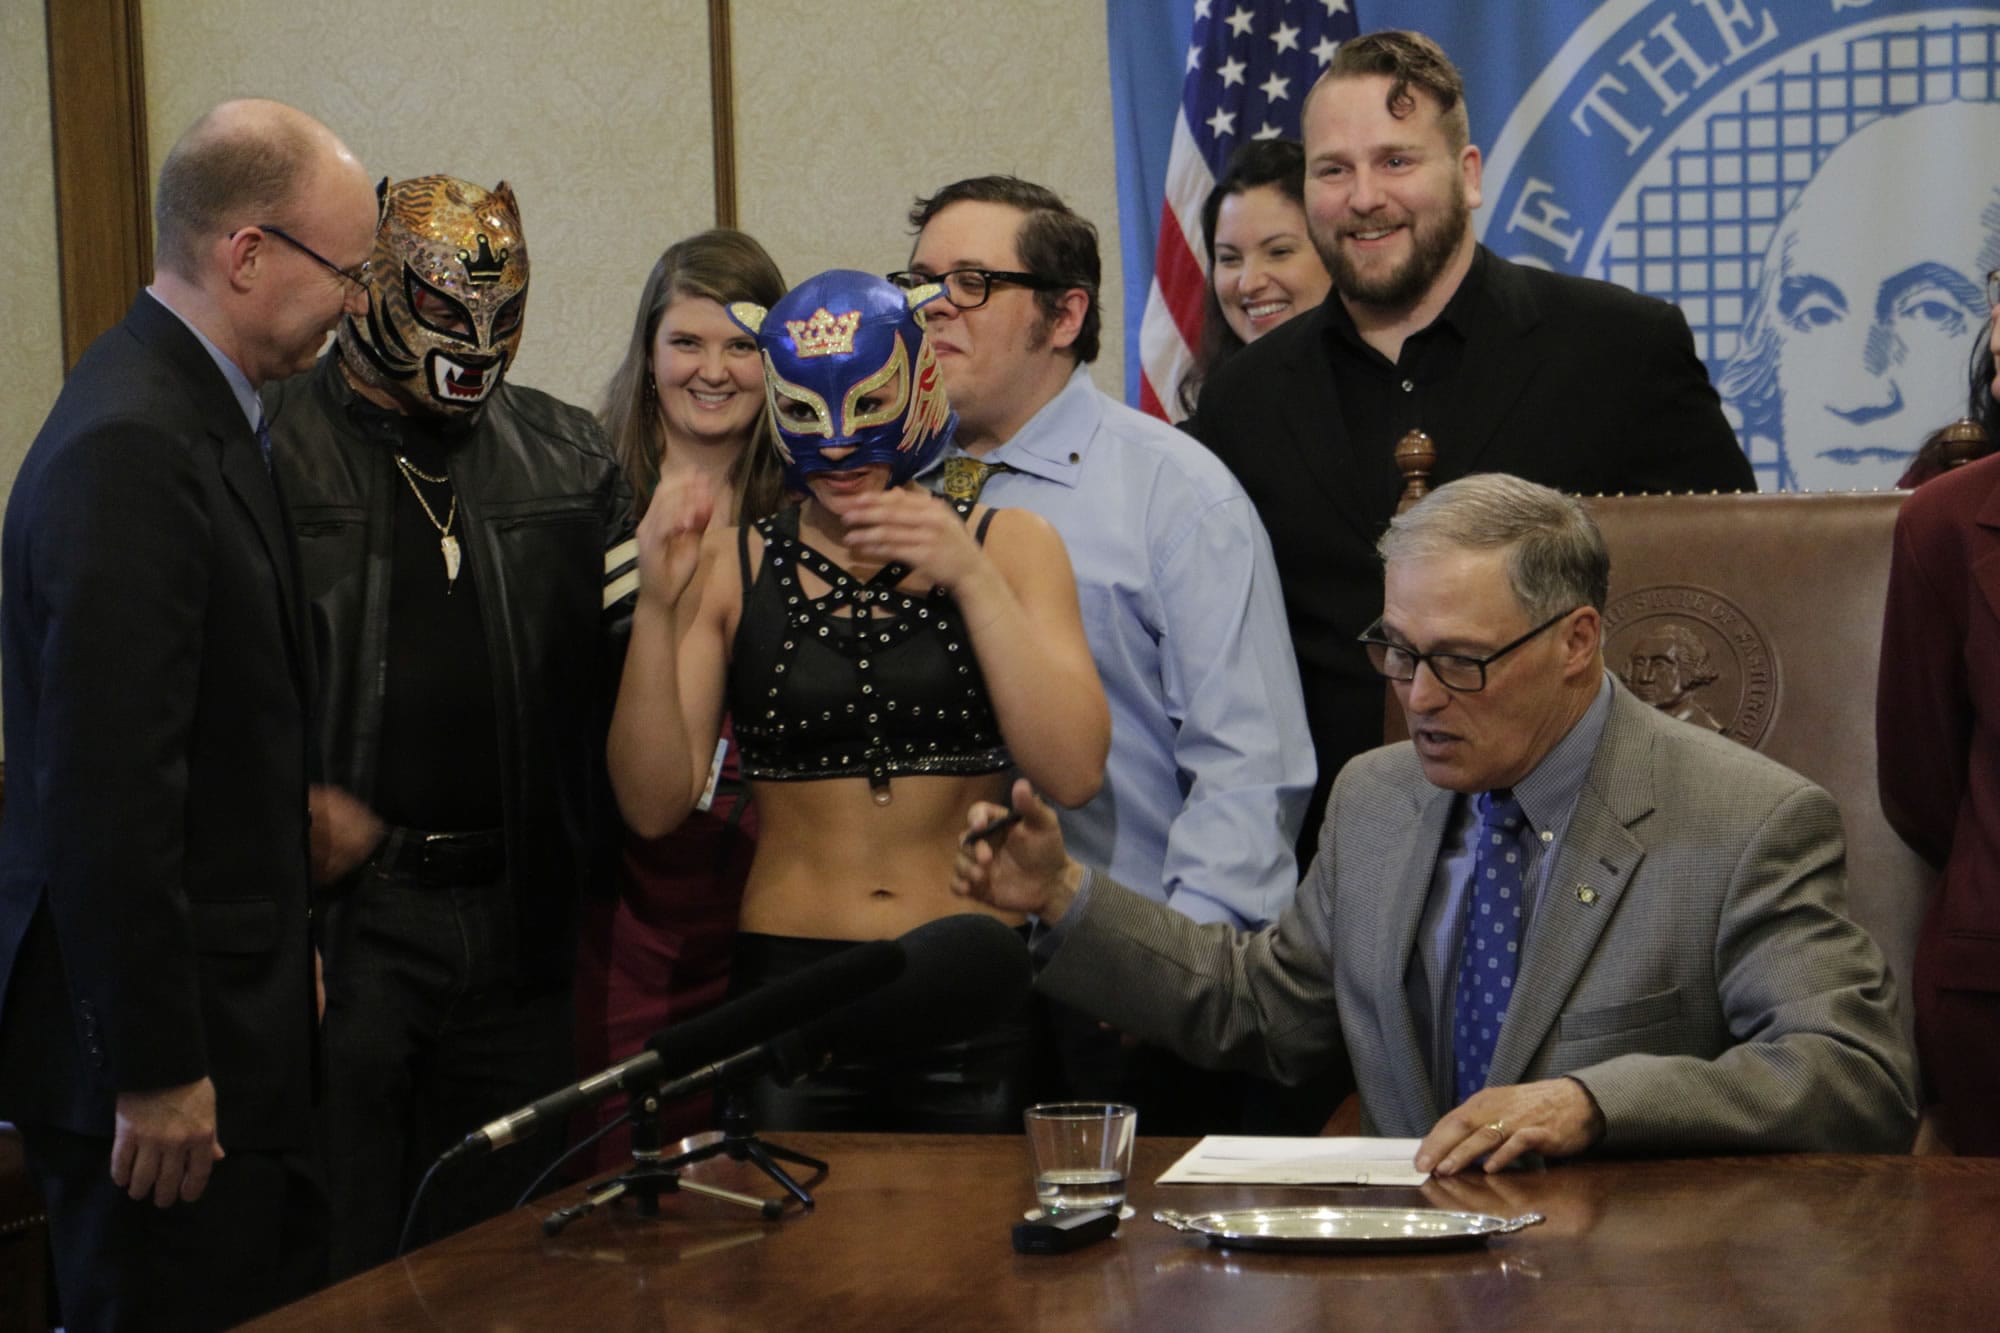 Washington Gov. Jay Inslee talks with supporters of theatrical wrestling before signing a bill that creates a license for theatrical wrestling schools, on Monday, April 17, 2017 in Olympia, Wash. Under the measure, any licensed theatrical wrestling school would be allowed to schedule a certain number of public performances.